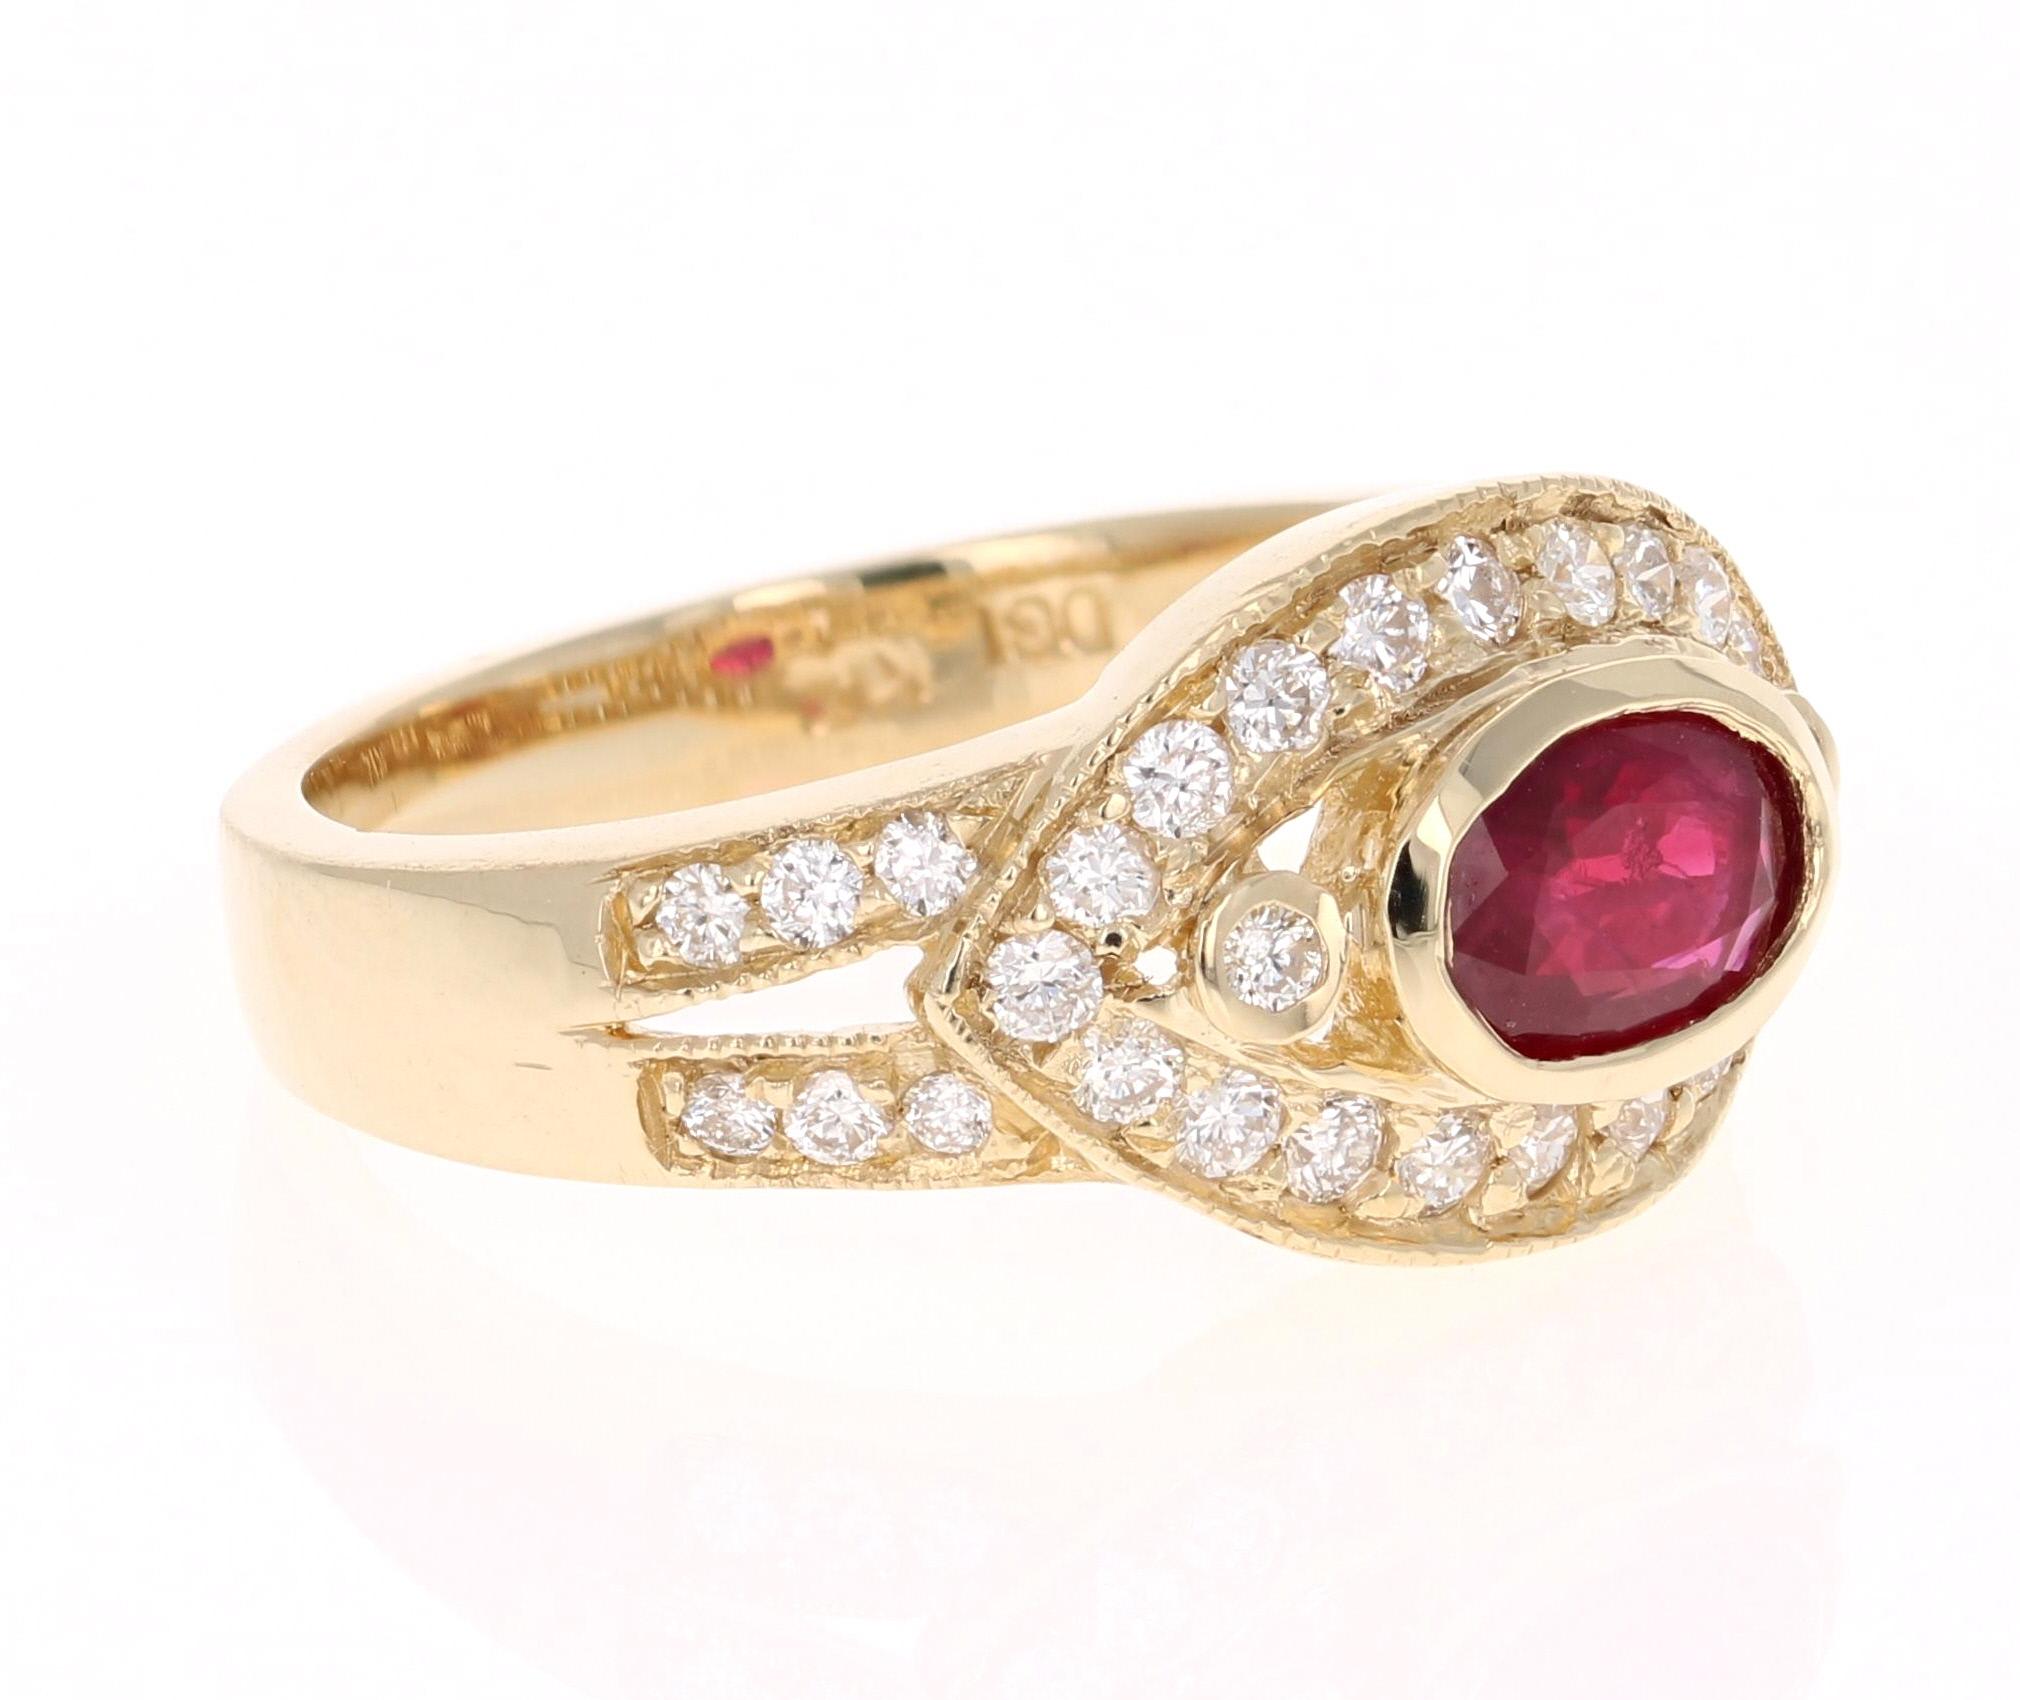 Simply beautiful Ruby Diamond Ring with a Oval Cut 0.68 Carat Burmese Ruby which is surrounded by 34 Round Cut Diamonds that weigh 0.58 carats. The total carat weight of the ring is 1.26 carats. The clarity and color of the diamonds are SI2-F. 

The